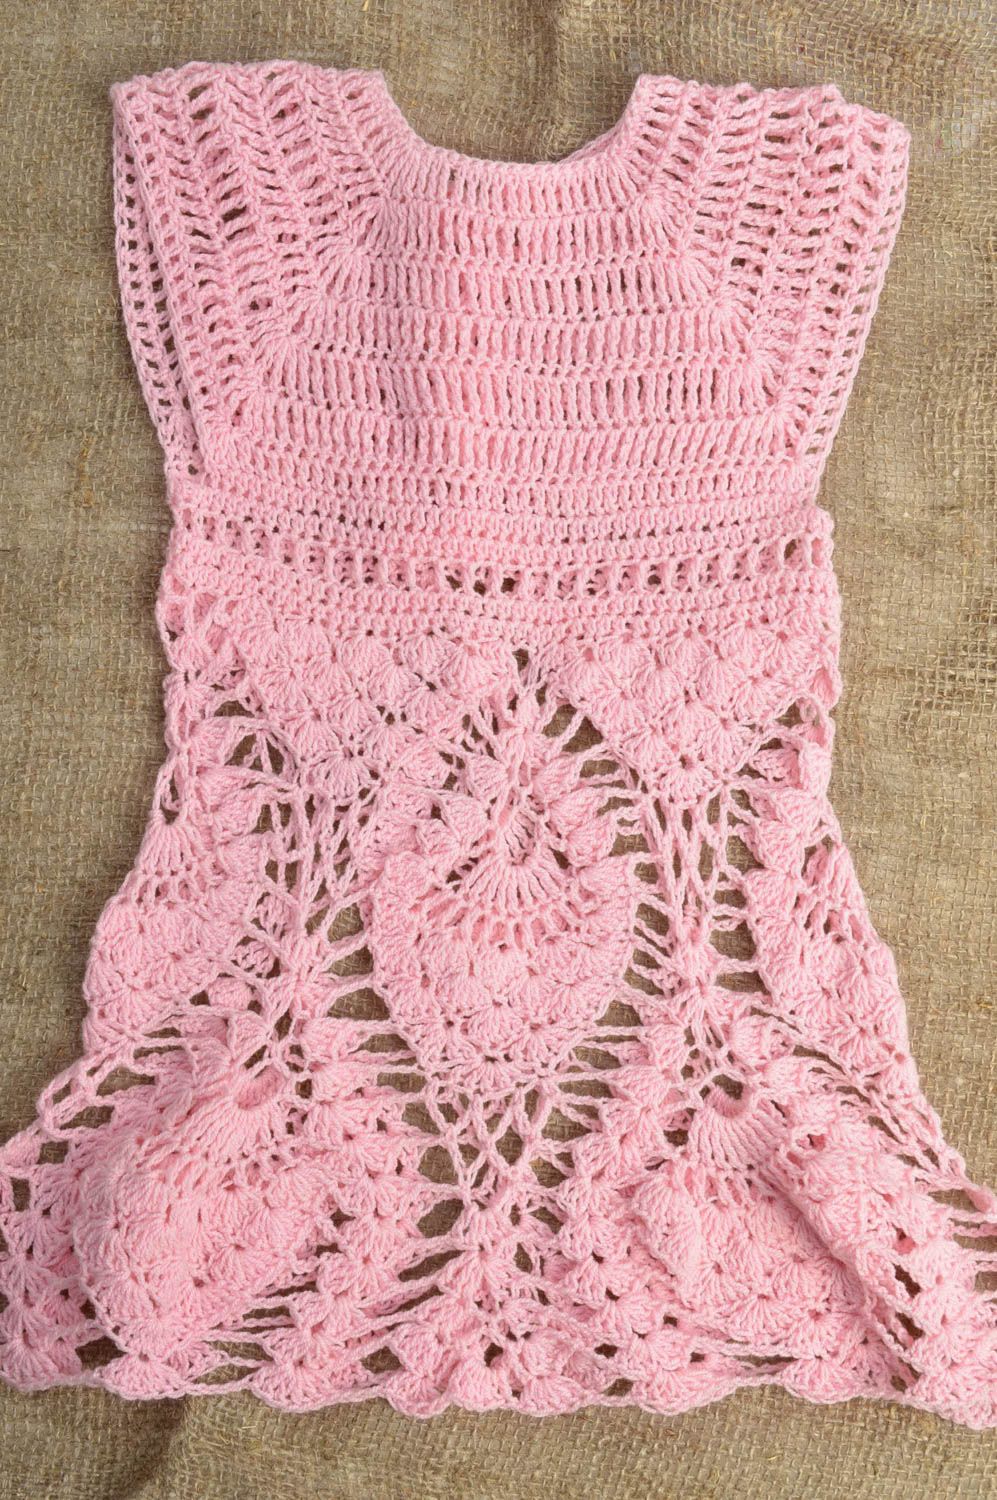 Beautiful crochet delicate dress made of cotton in pink color for baby girls photo 1